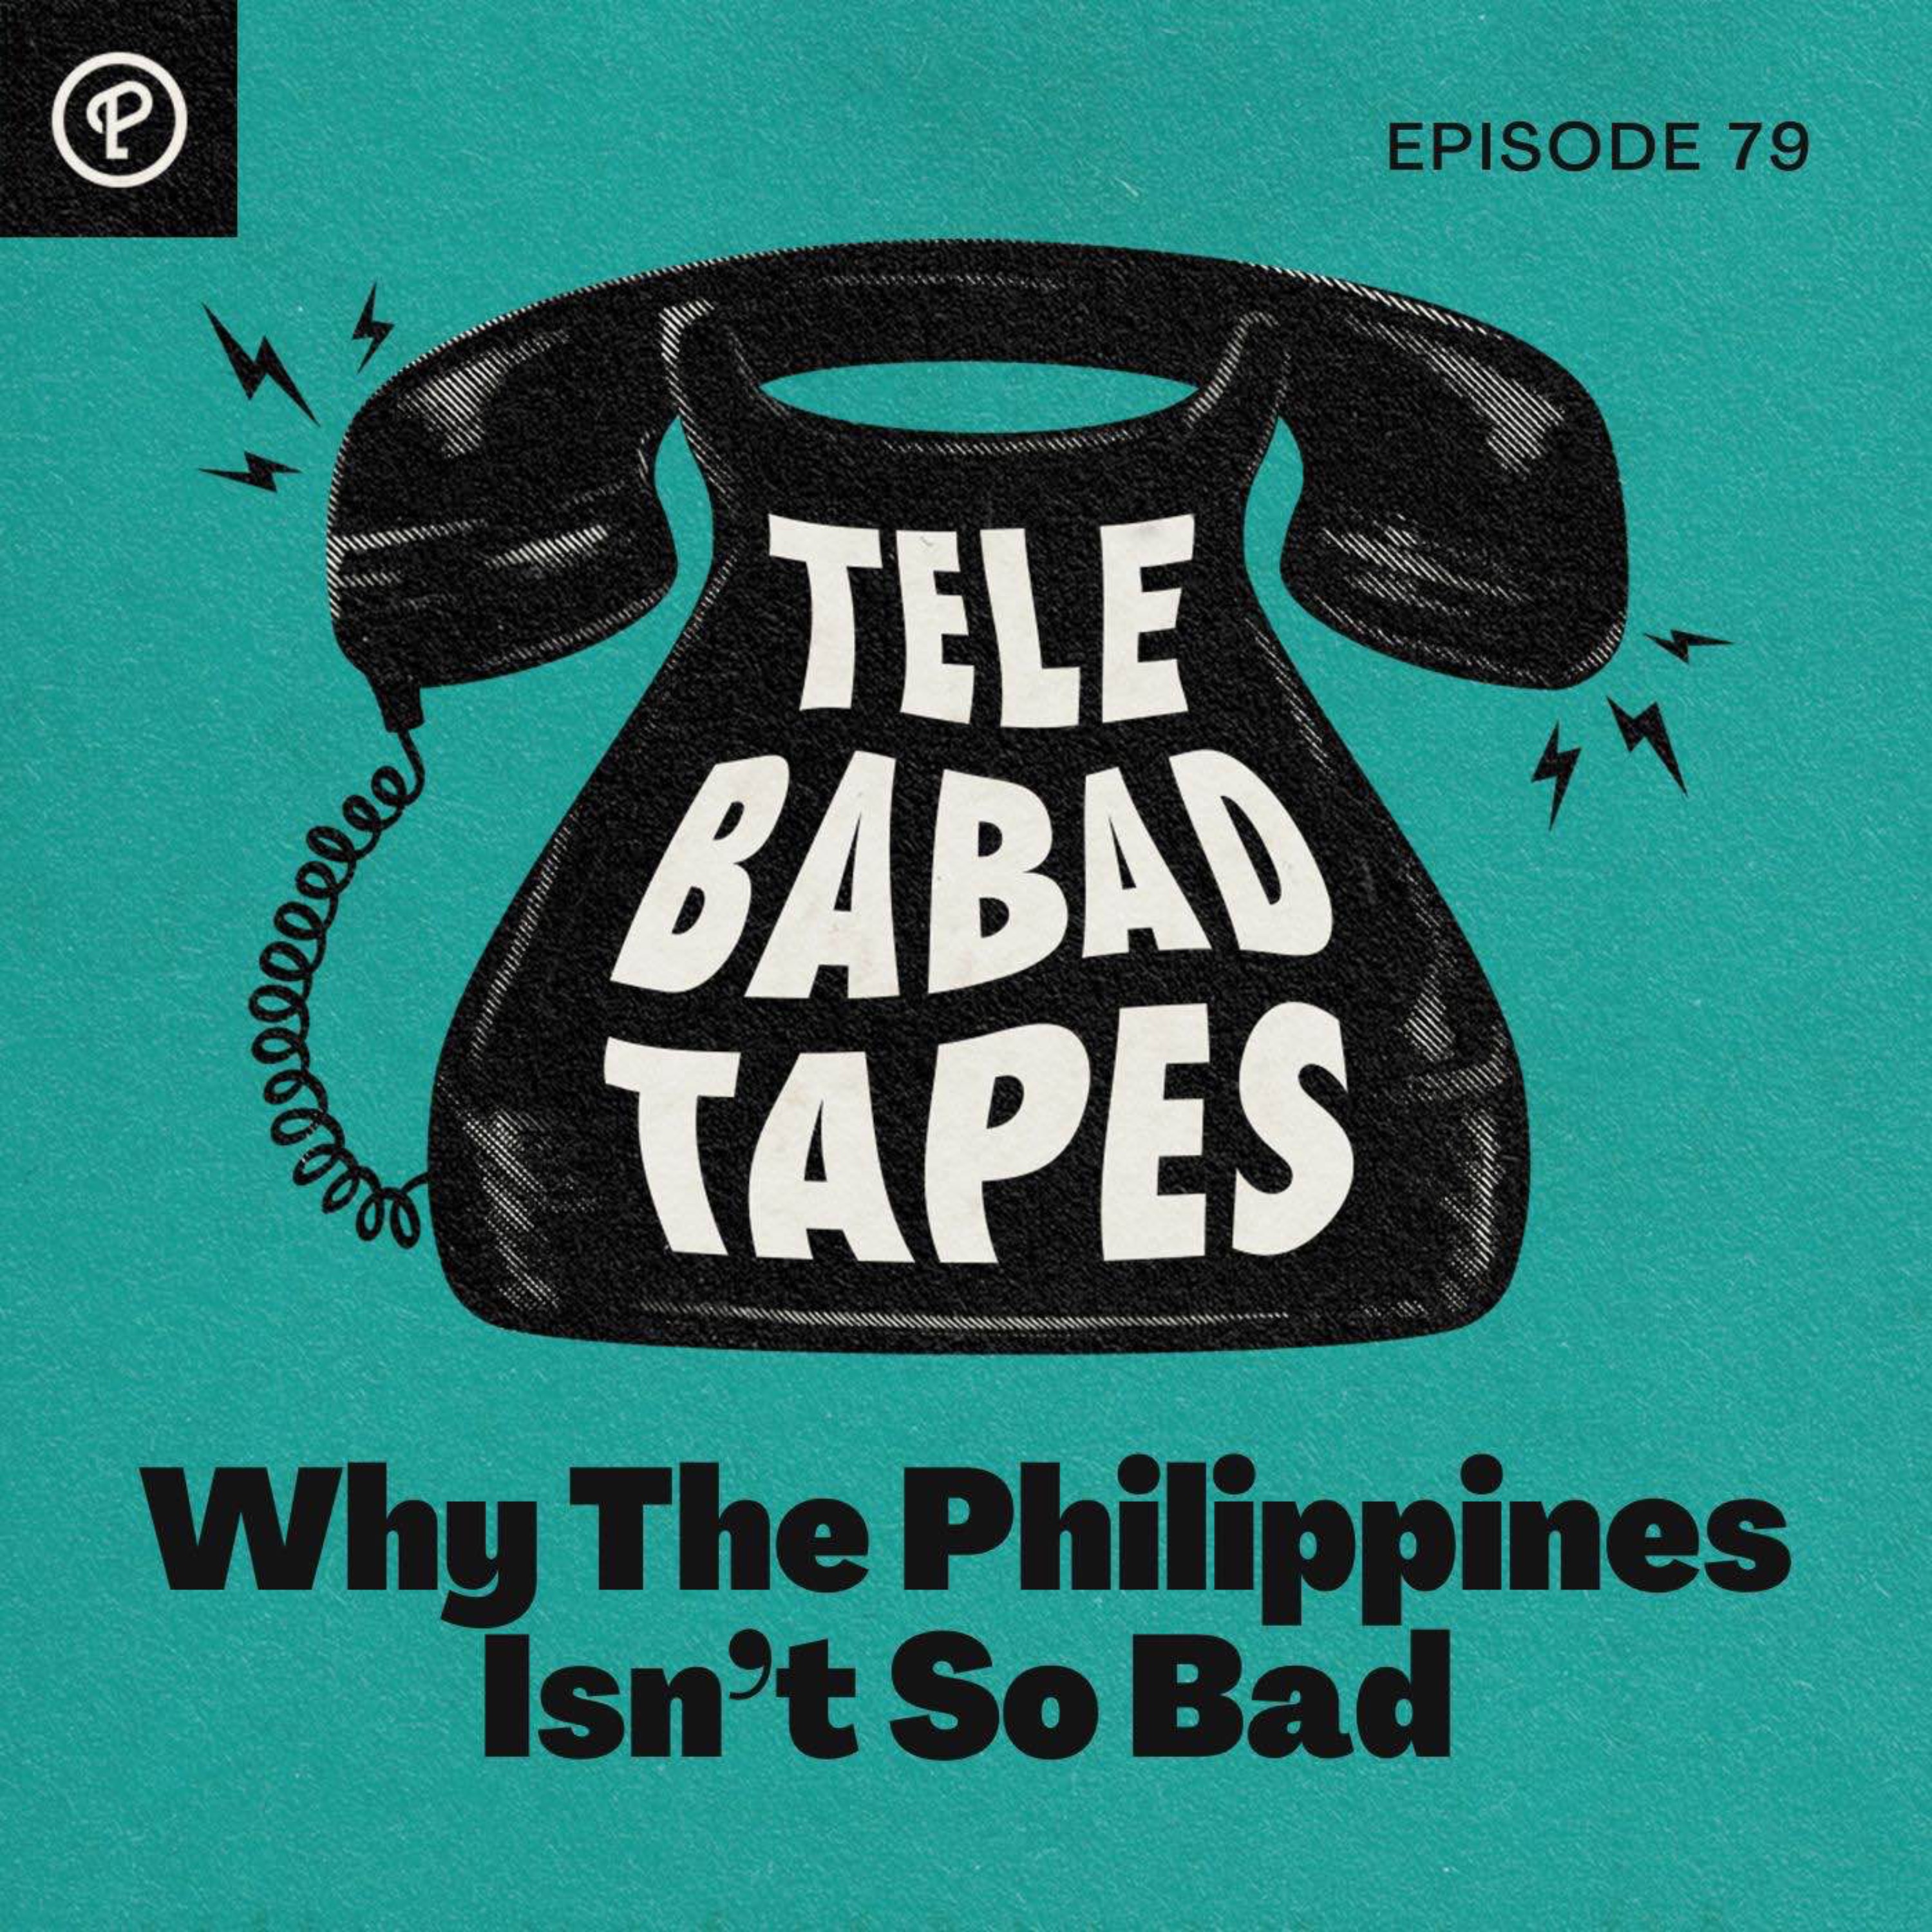 Episode 79: Why The Philippines Isn’t So Bad